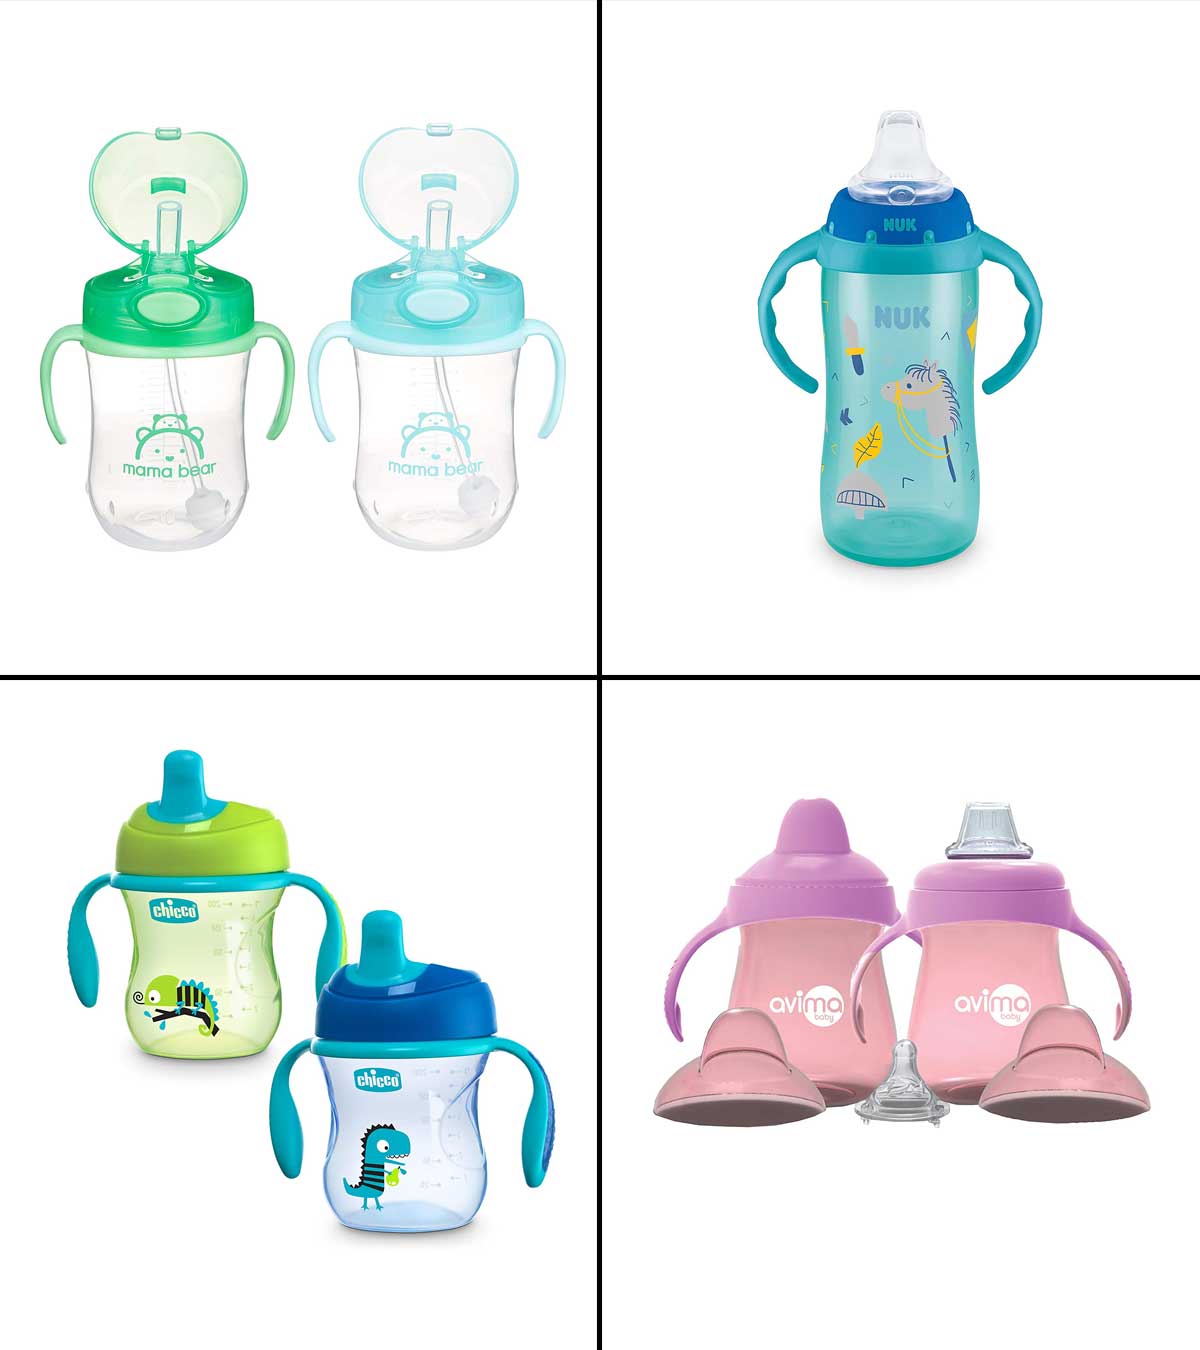 When to Introduce a Sippy Cup - How to Transition From Bottle to Sippy Cup